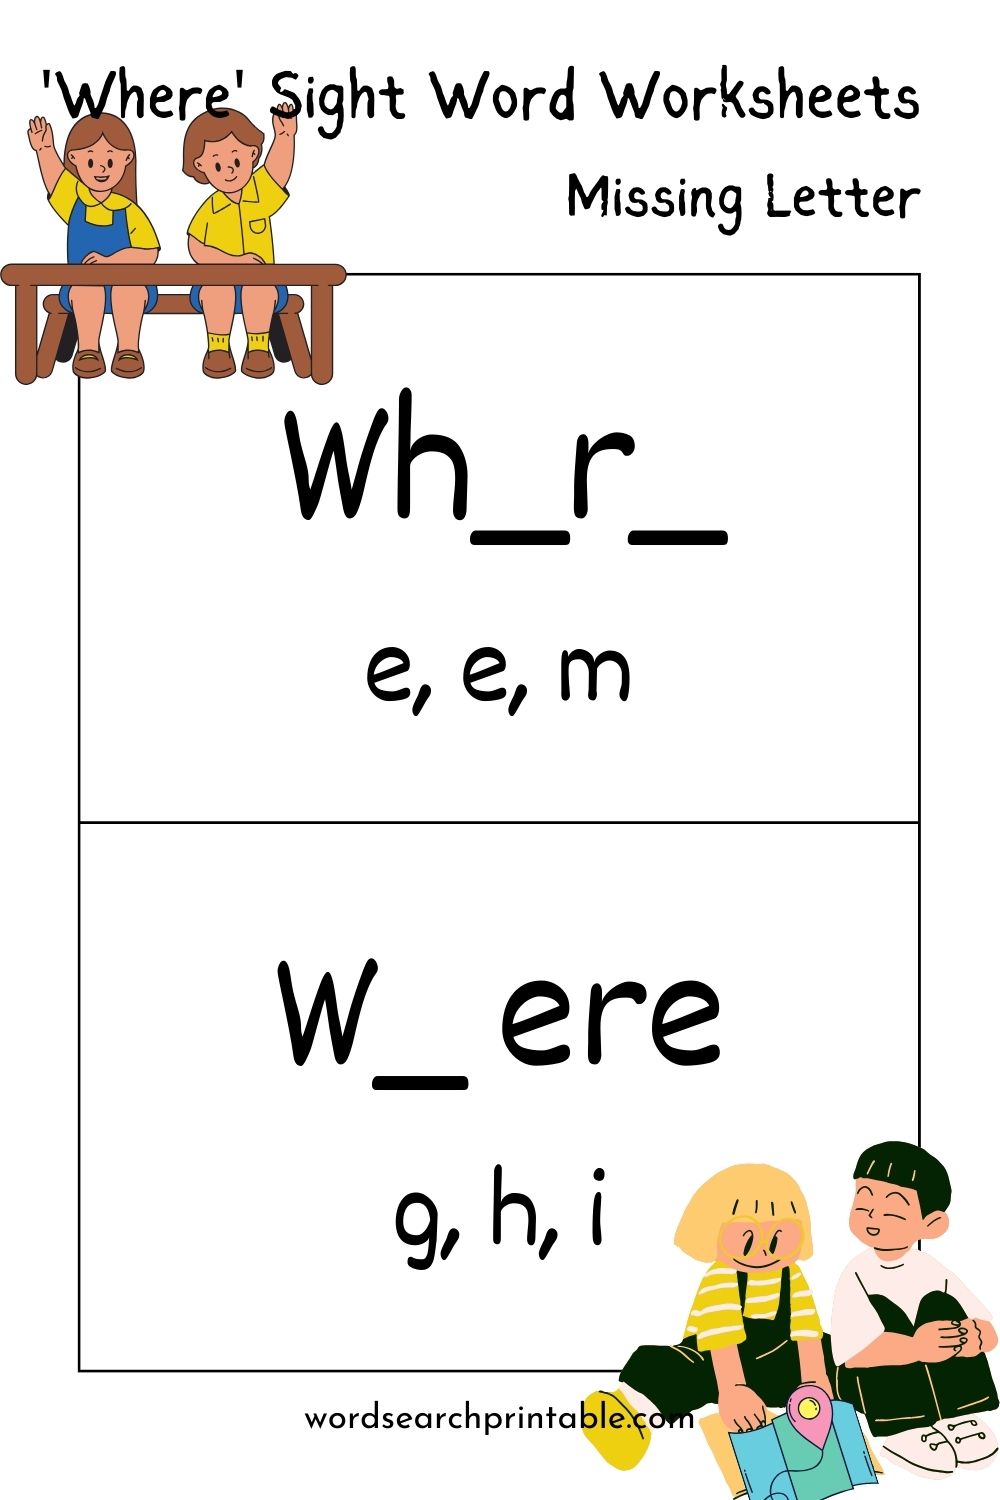 Find the missing letter in the sight word Where